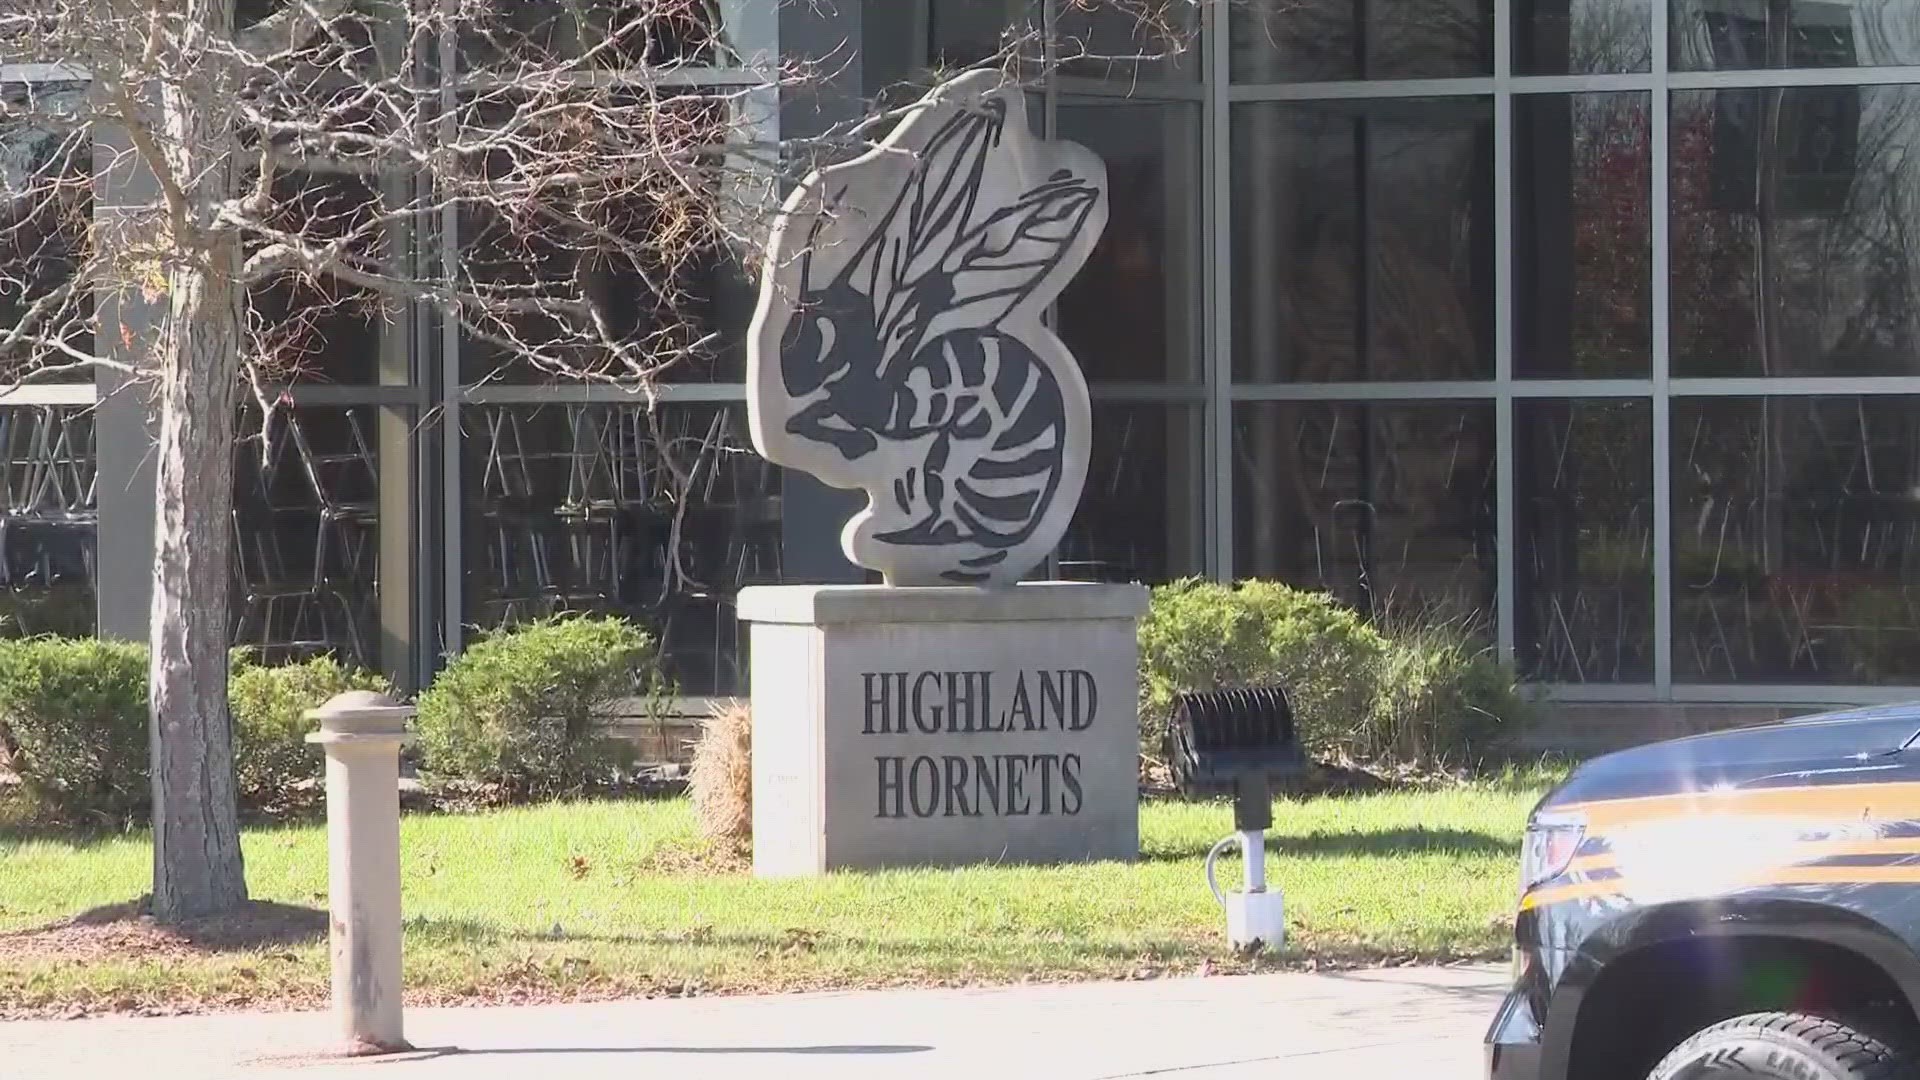 Students at Highland High School in Medina were evacuated to the stadium Monday morning as officials enacted their emergency plan to address a bomb threat.